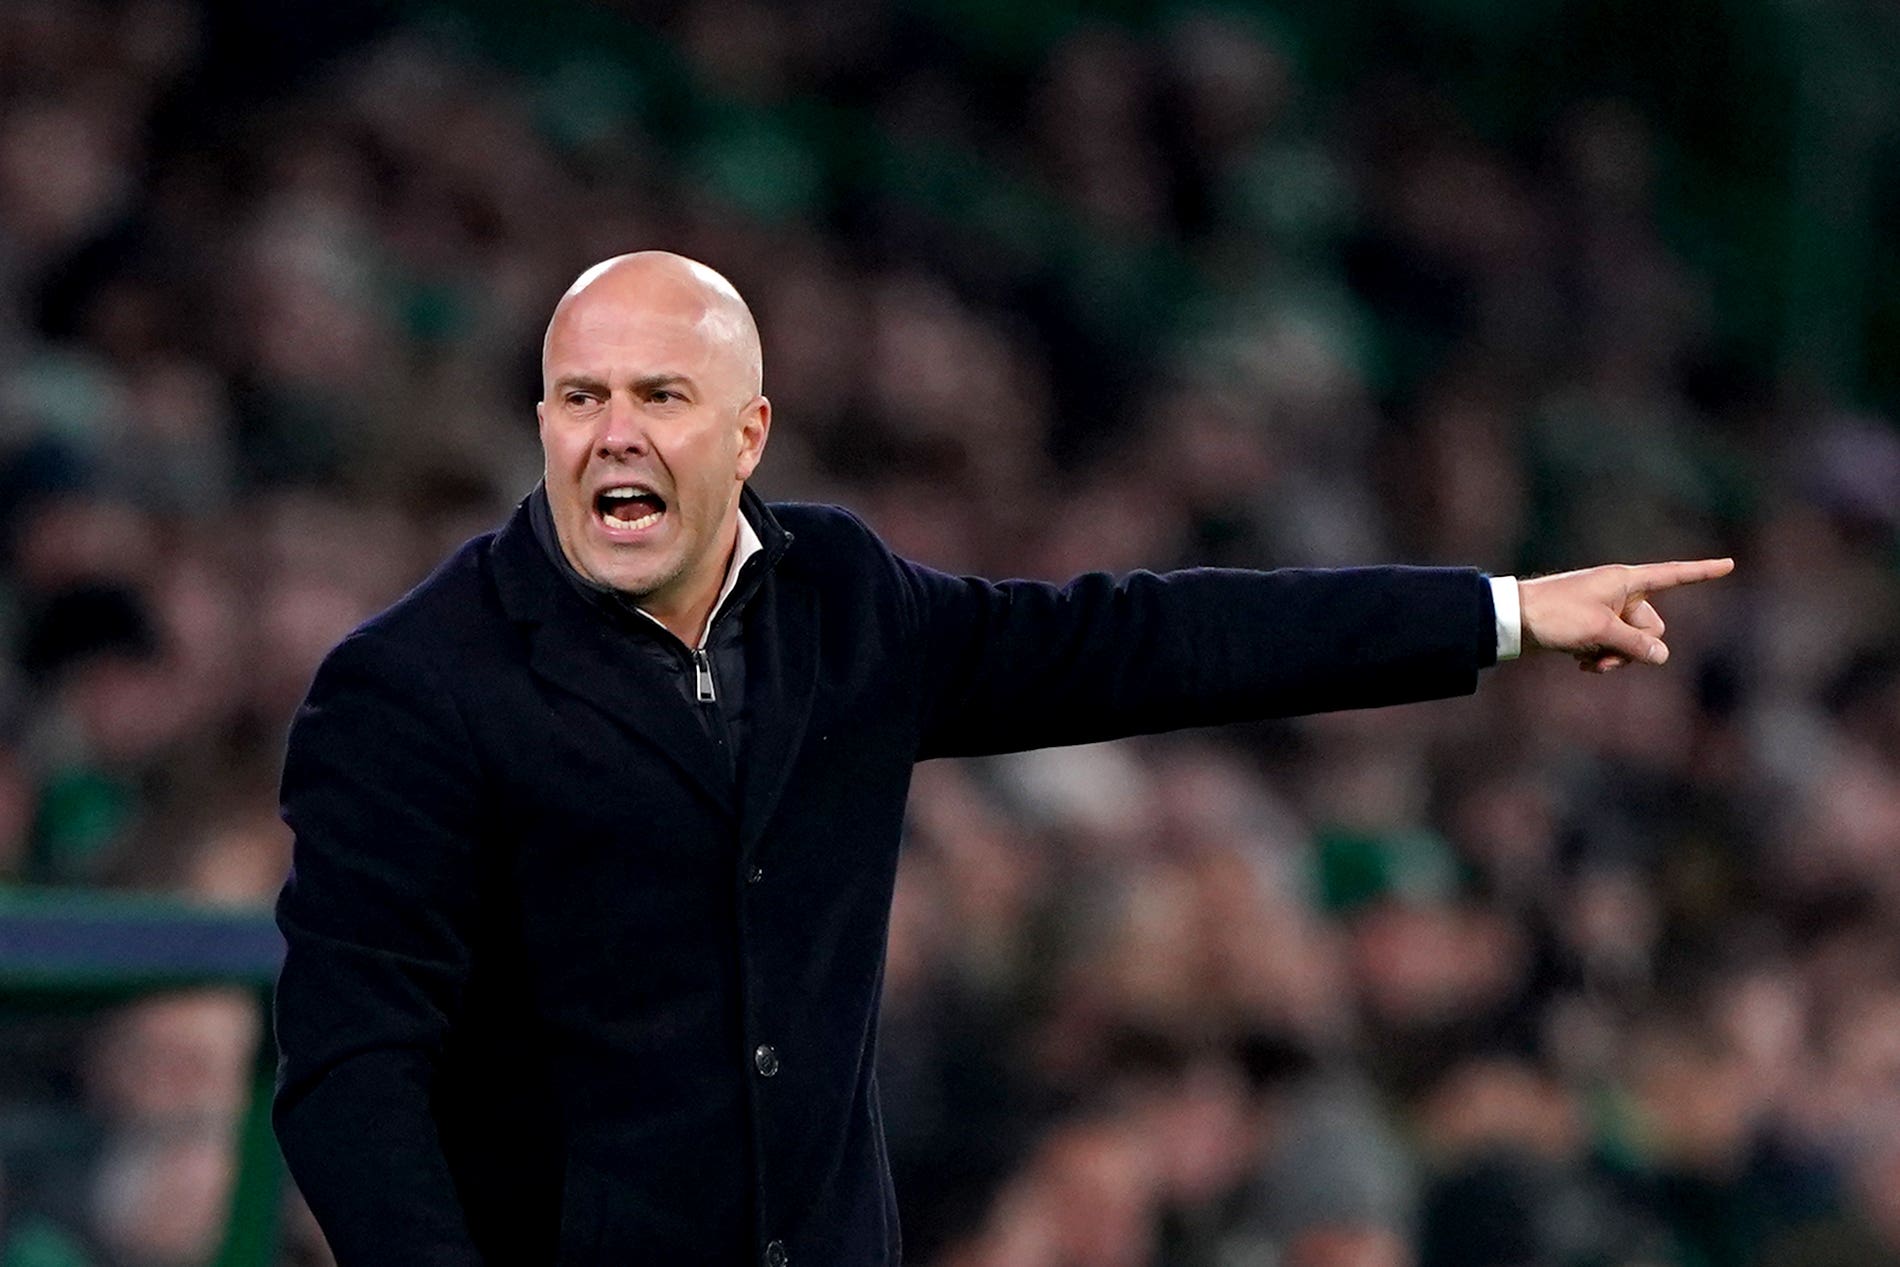 Feyenoord manager Arne Slot has emerged as the leading contender for the Liverpool job